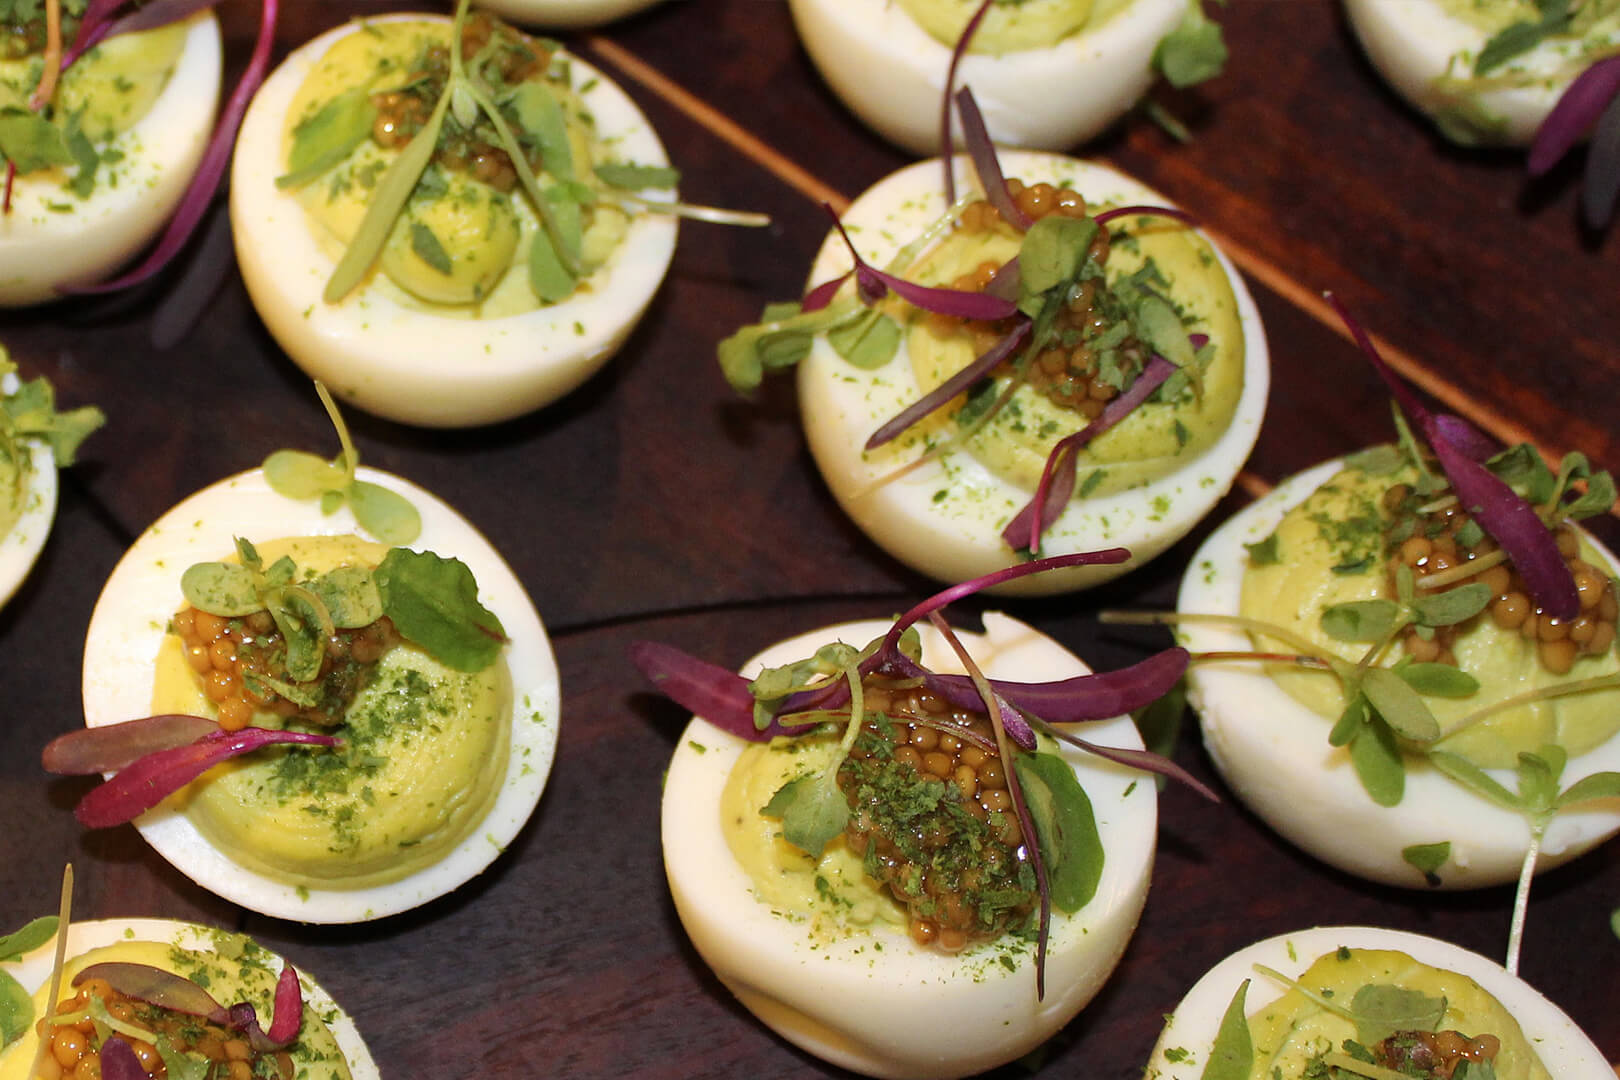 BRL also offers the highly requested deviled eggs